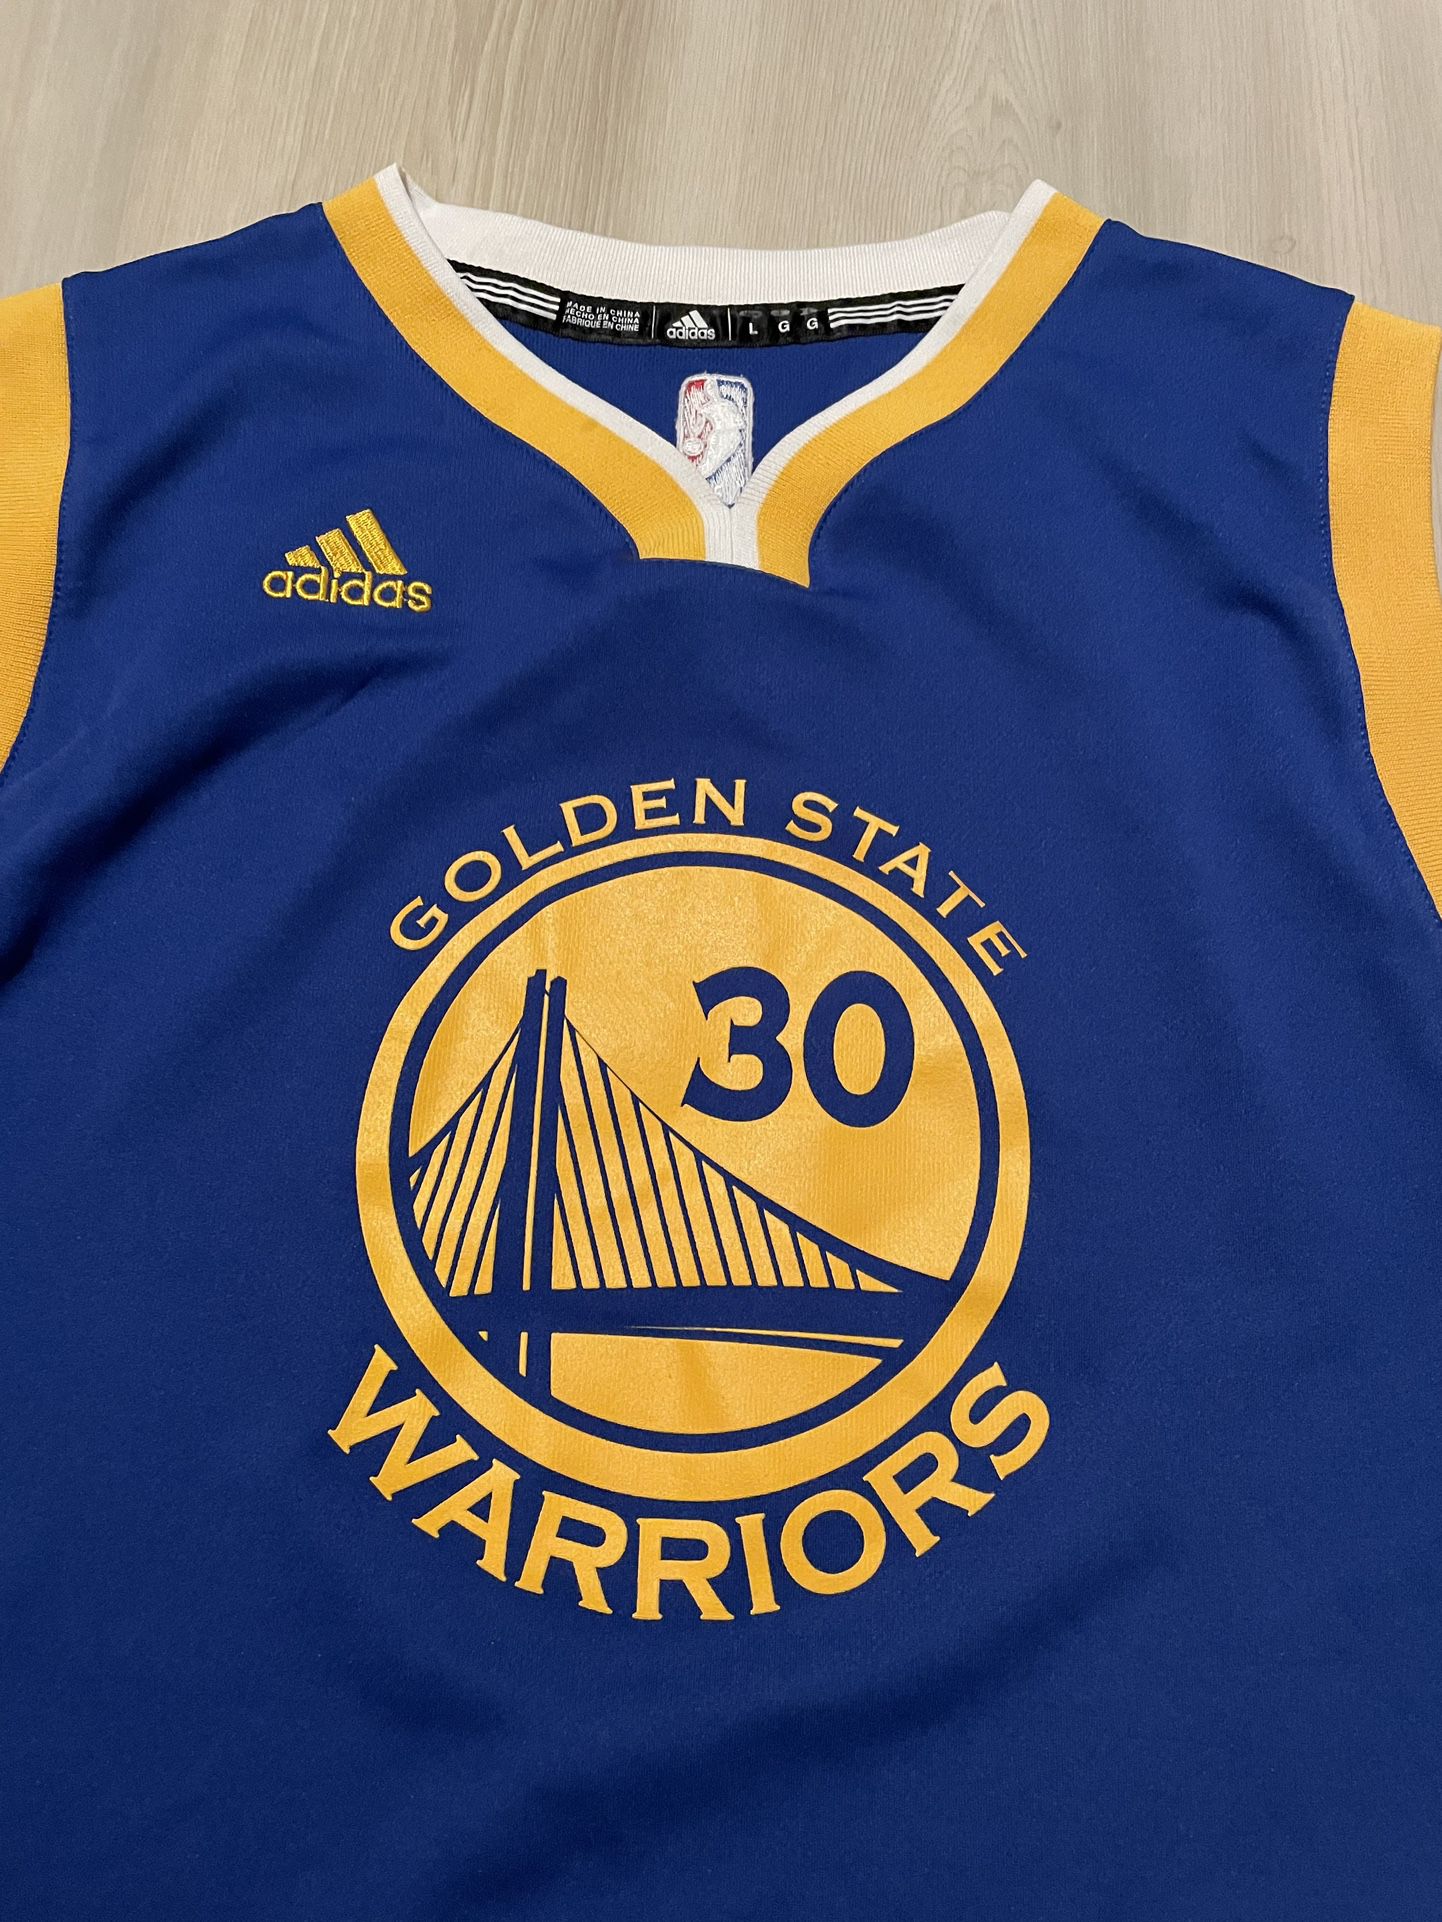 Golden State Warriors Jersey for Sale in Palo Alto, CA - OfferUp